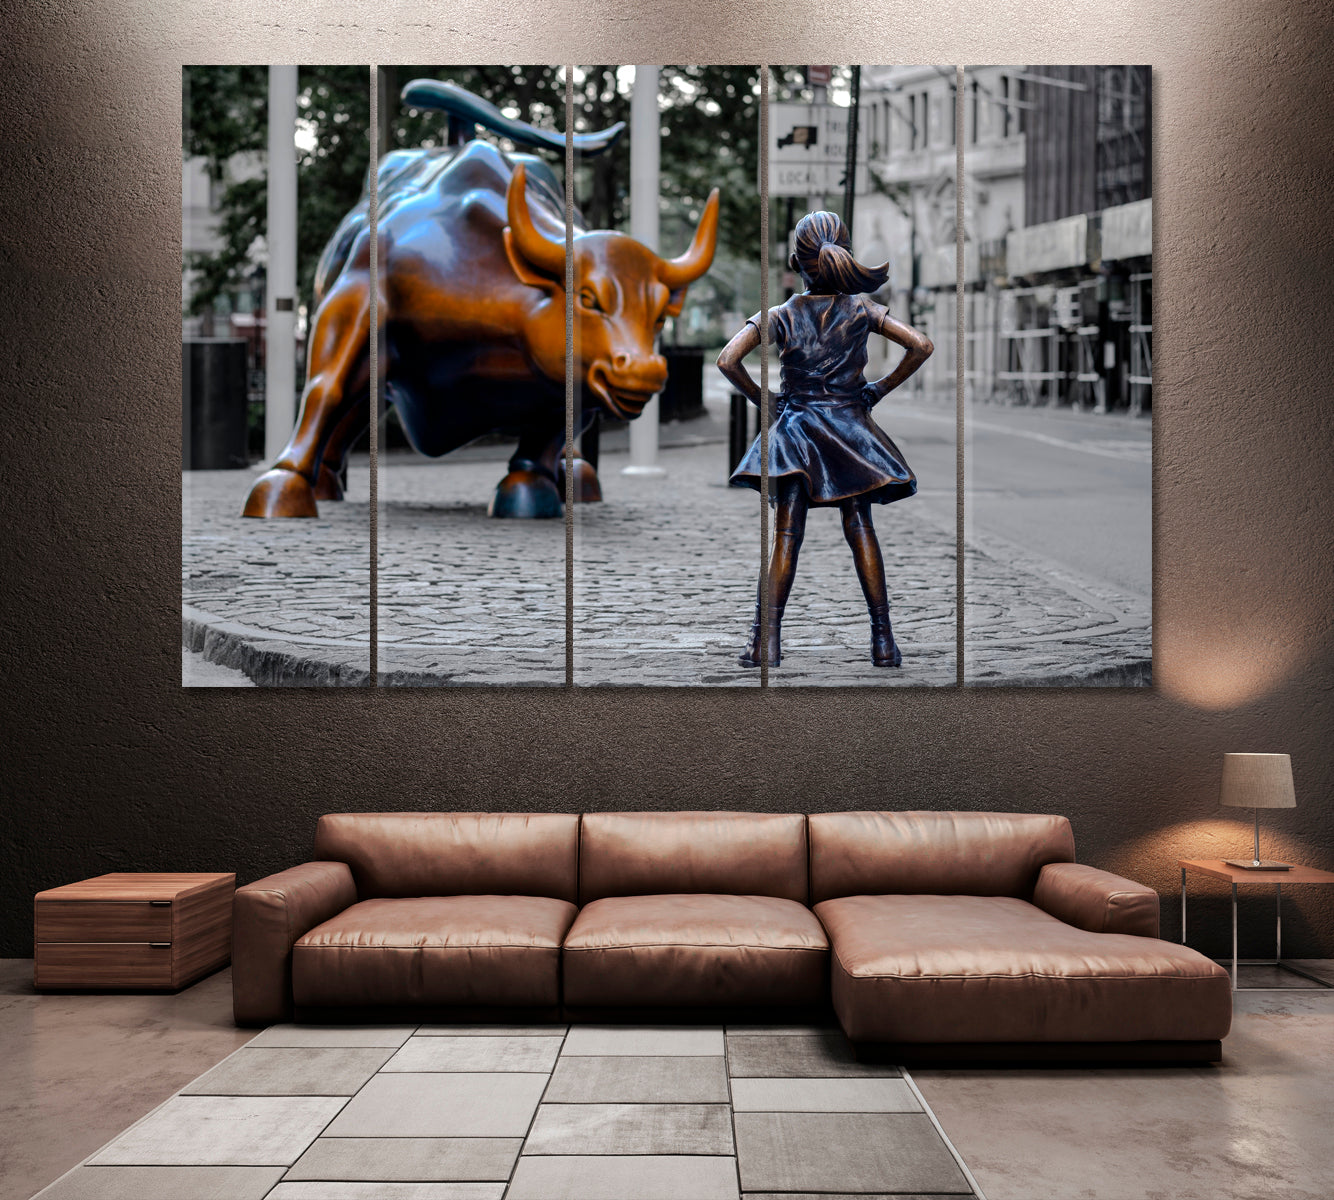 Fearless Girl Statue Facing Charging Bull Lower Manhattan NY Canvas Print ArtLexy 5 Panels 36"x24" inches 